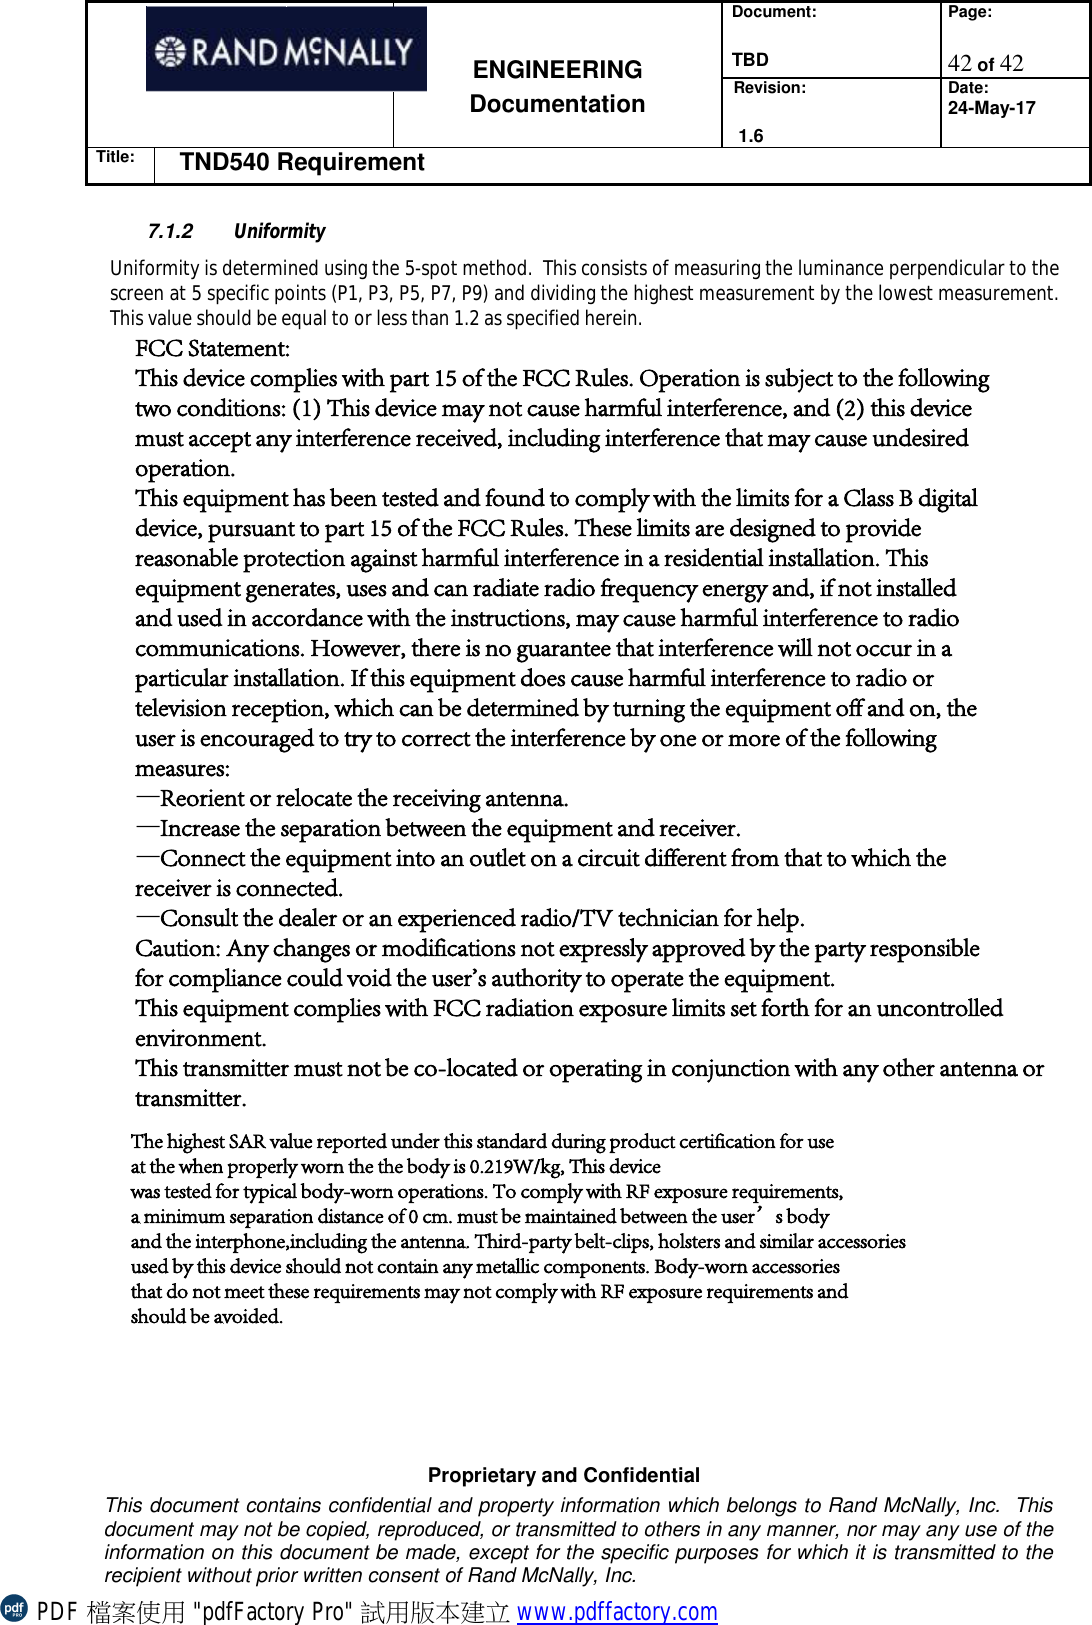 Document: TBDPage: 42 of 42 ENGINEERING Documentation Revision: 1.6Date:24-May-17Title: TND540 Requirement Proprietary and Confidential This document contains confidential and property information which belongs to Rand McNally, Inc.  This document may not be copied, reproduced, or transmitted to others in any manner, nor may any use of the information on this document be made, except for the specific purposes for which it is transmitted to the recipient without prior written consent of Rand McNally, Inc.  7.1.2  Uniformity Uniformity is determined using the 5-spot method.  This consists of measuring the luminance perpendicular to the screen at 5 specific points (P1, P3, P5, P7, P9) and dividing the highest measurement by the lowest measurement. This value should be equal to or less than 1.2 as specified herein. PDF 檔案使用 &quot;pdfFactory Pro&quot; 試用版本建立 www.pdffactory.comFCC Statement:This device complies with part 15 of the FCC Rules. Operation is subject to the followingtwo conditions: (1) This device may not cause harmful interference, and (2) this devicemust accept any interference received, including interference that may cause undesiredoperation.This equipment has been tested and found to comply with the limits for a Class B digitaldevice, pursuant to part 15 of the FCC Rules. These limits are designed to providereasonable protection against harmful interference in a residential installation. Thisequipment generates, uses and can radiate radio frequency energy and, if not installedand used in accordance with the instructions, may cause harmful interference to radiocommunications. However, there is no guarantee that interference will not occur in aparticular installation. If this equipment does cause harmful interference to radio ortelevision reception, which can be determined by turning the equipment off and on, theuser is encouraged to try to correct the interference by one or more of the followingmeasures:—Reorient or relocate the receiving antenna.—Increase the separation between the equipment and receiver.—Connect the equipment into an outlet on a circuit different from that to which thereceiver is connected.—Consult the dealer or an experienced radio/TV technician for help.Caution: Any changes or modifications not expressly approved by the party responsiblefor compliance could void the user&apos;s authority to operate the equipment.This equipment complies with FCC radiation exposure limits set forth for an uncontrolled environment.This transmitter must not be co-located or operating in conjunction with any other antenna ortransmitter.The highest SAR value reported under this standard during product certification for useat the when properly worn the the body is 0.219W/kg, This devicewas tested for typical body-worn operations. To comply with RF exposure requirements,a minimum separation distance of 0 cm. must be maintained between the user’s bodyand the interphone,including the antenna. Third-party belt-clips, holsters and similar accessoriesused by this device should not contain any metallic components. Body-worn accessoriesthat do not meet these requirements may not comply with RF exposure requirements andshould be avoided.